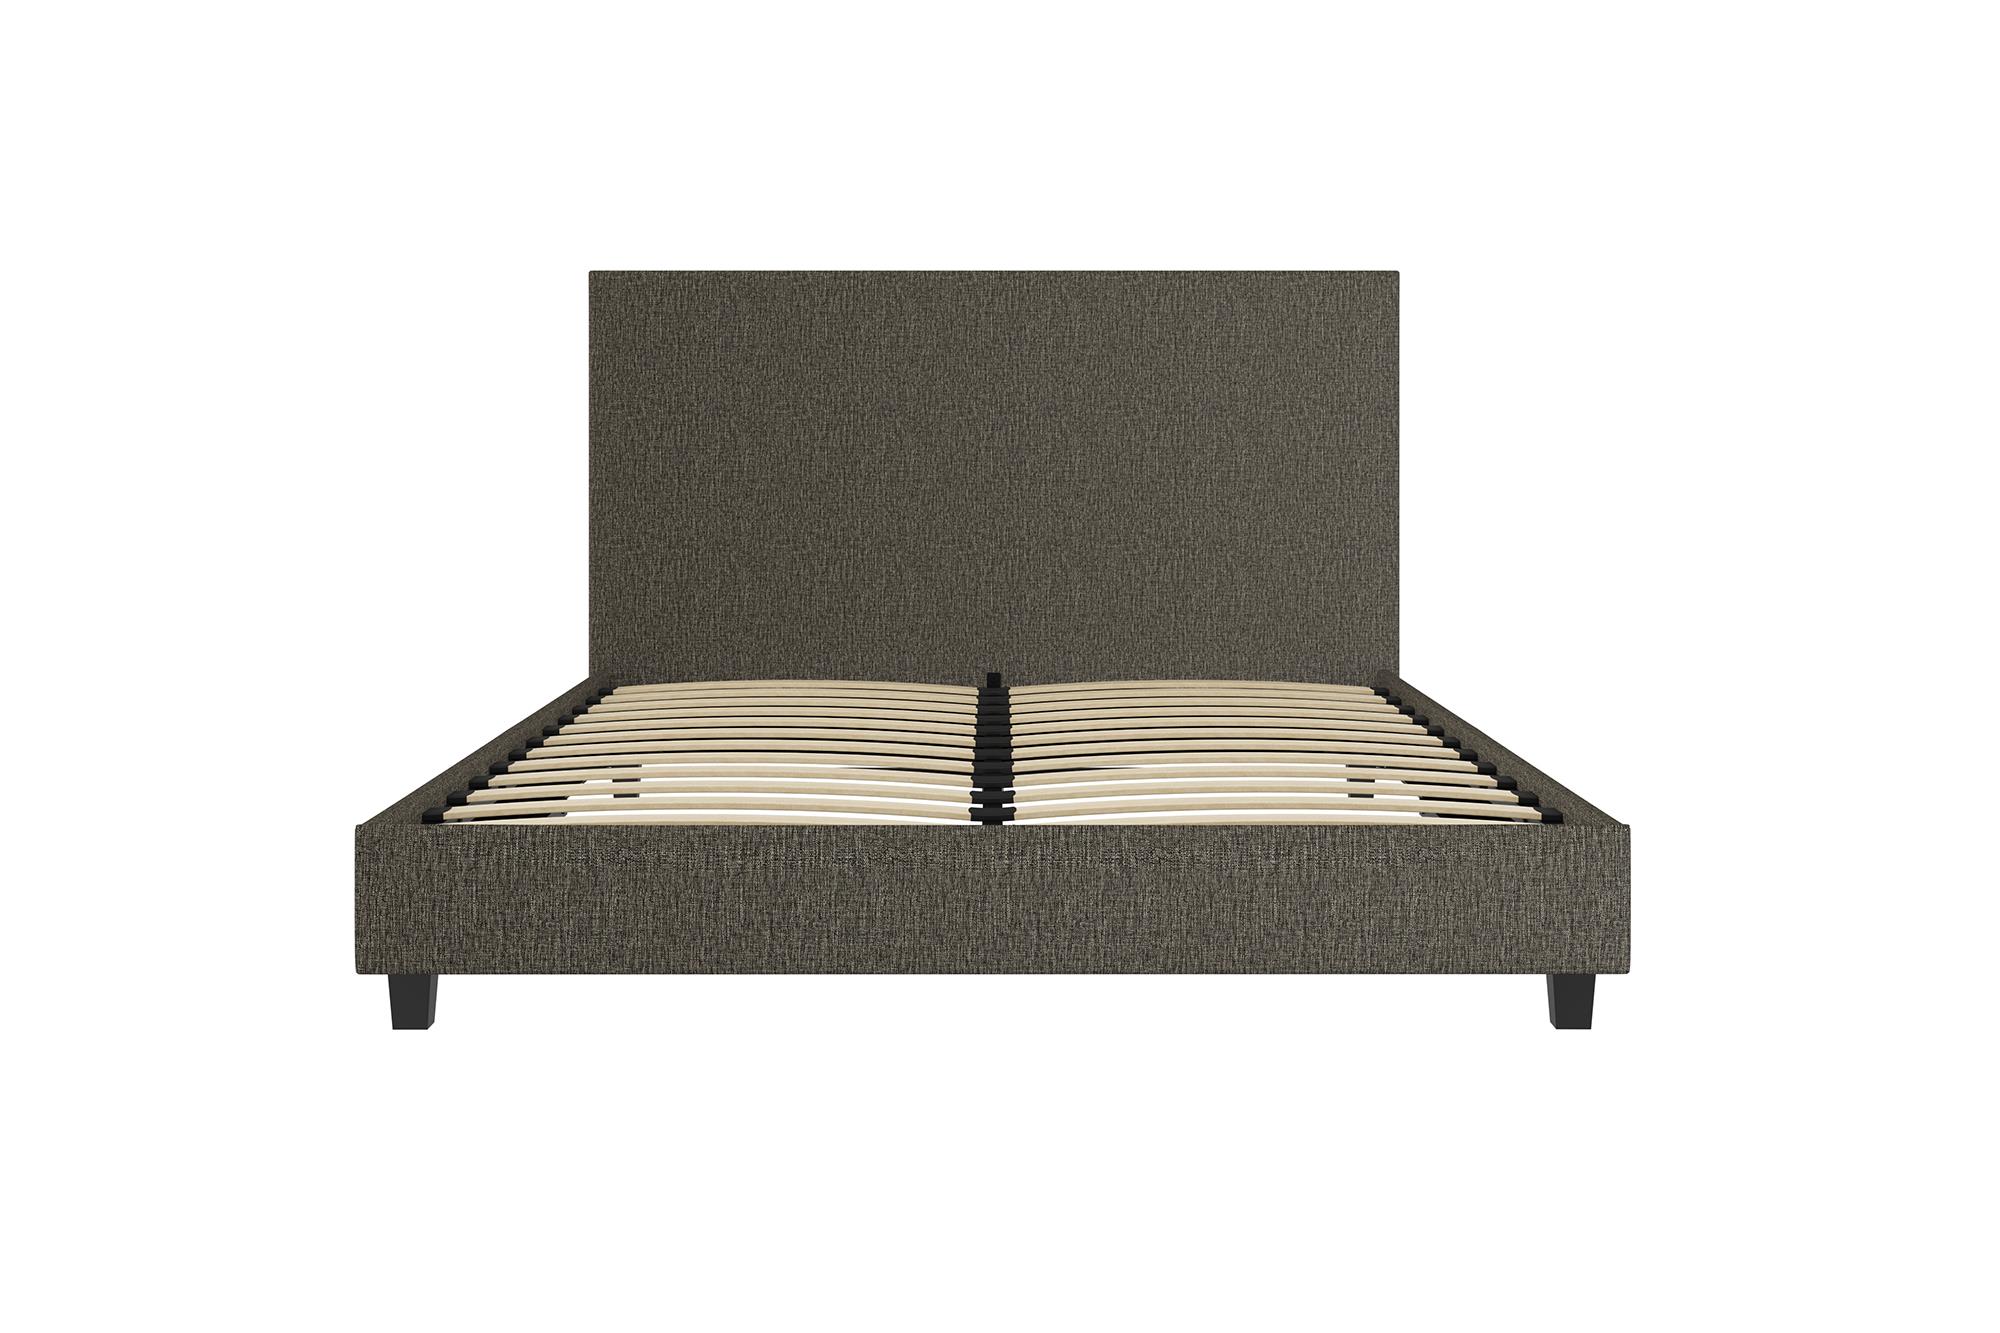 Mainstays Upholstered Bed, Queen Bed Frame, Gray Linen - image 3 of 21